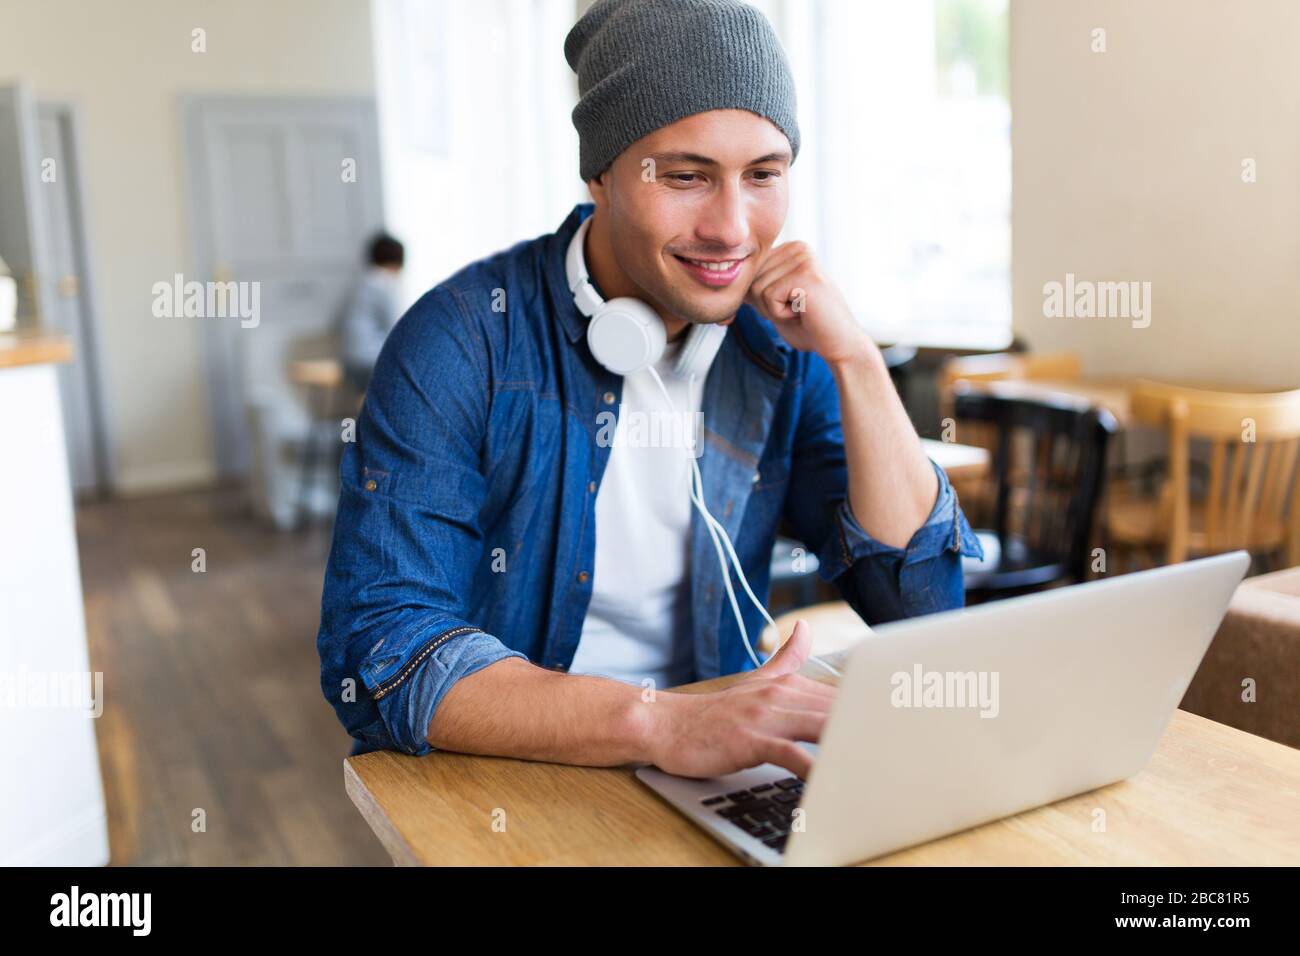 Young man using laptop at cafe Stock Photo